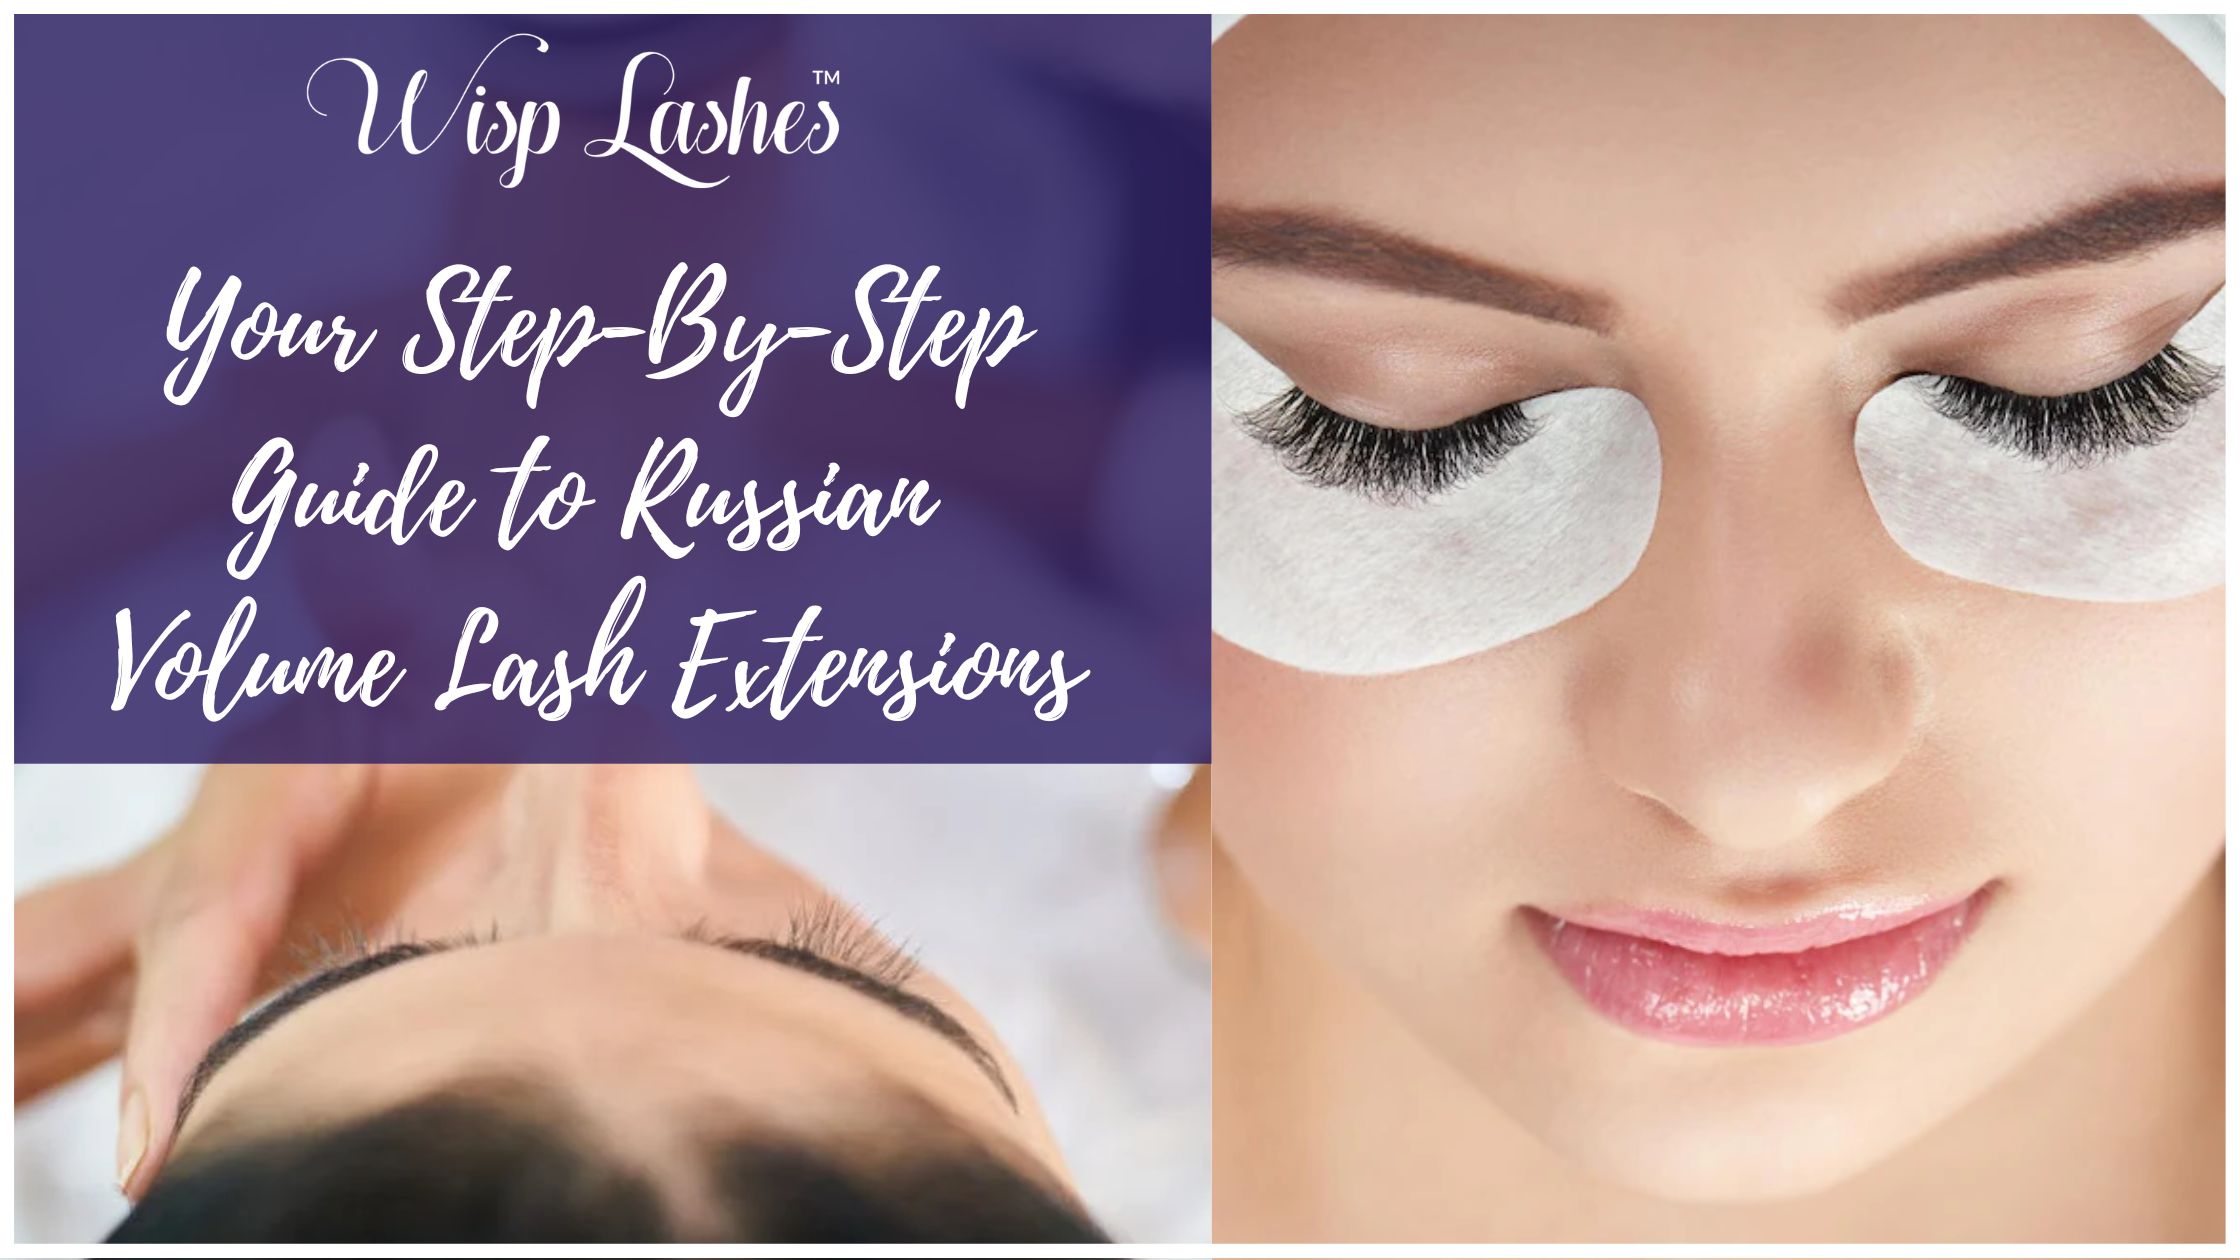 Your Step-By-Step Guide to Russian Volume Lash Extensions